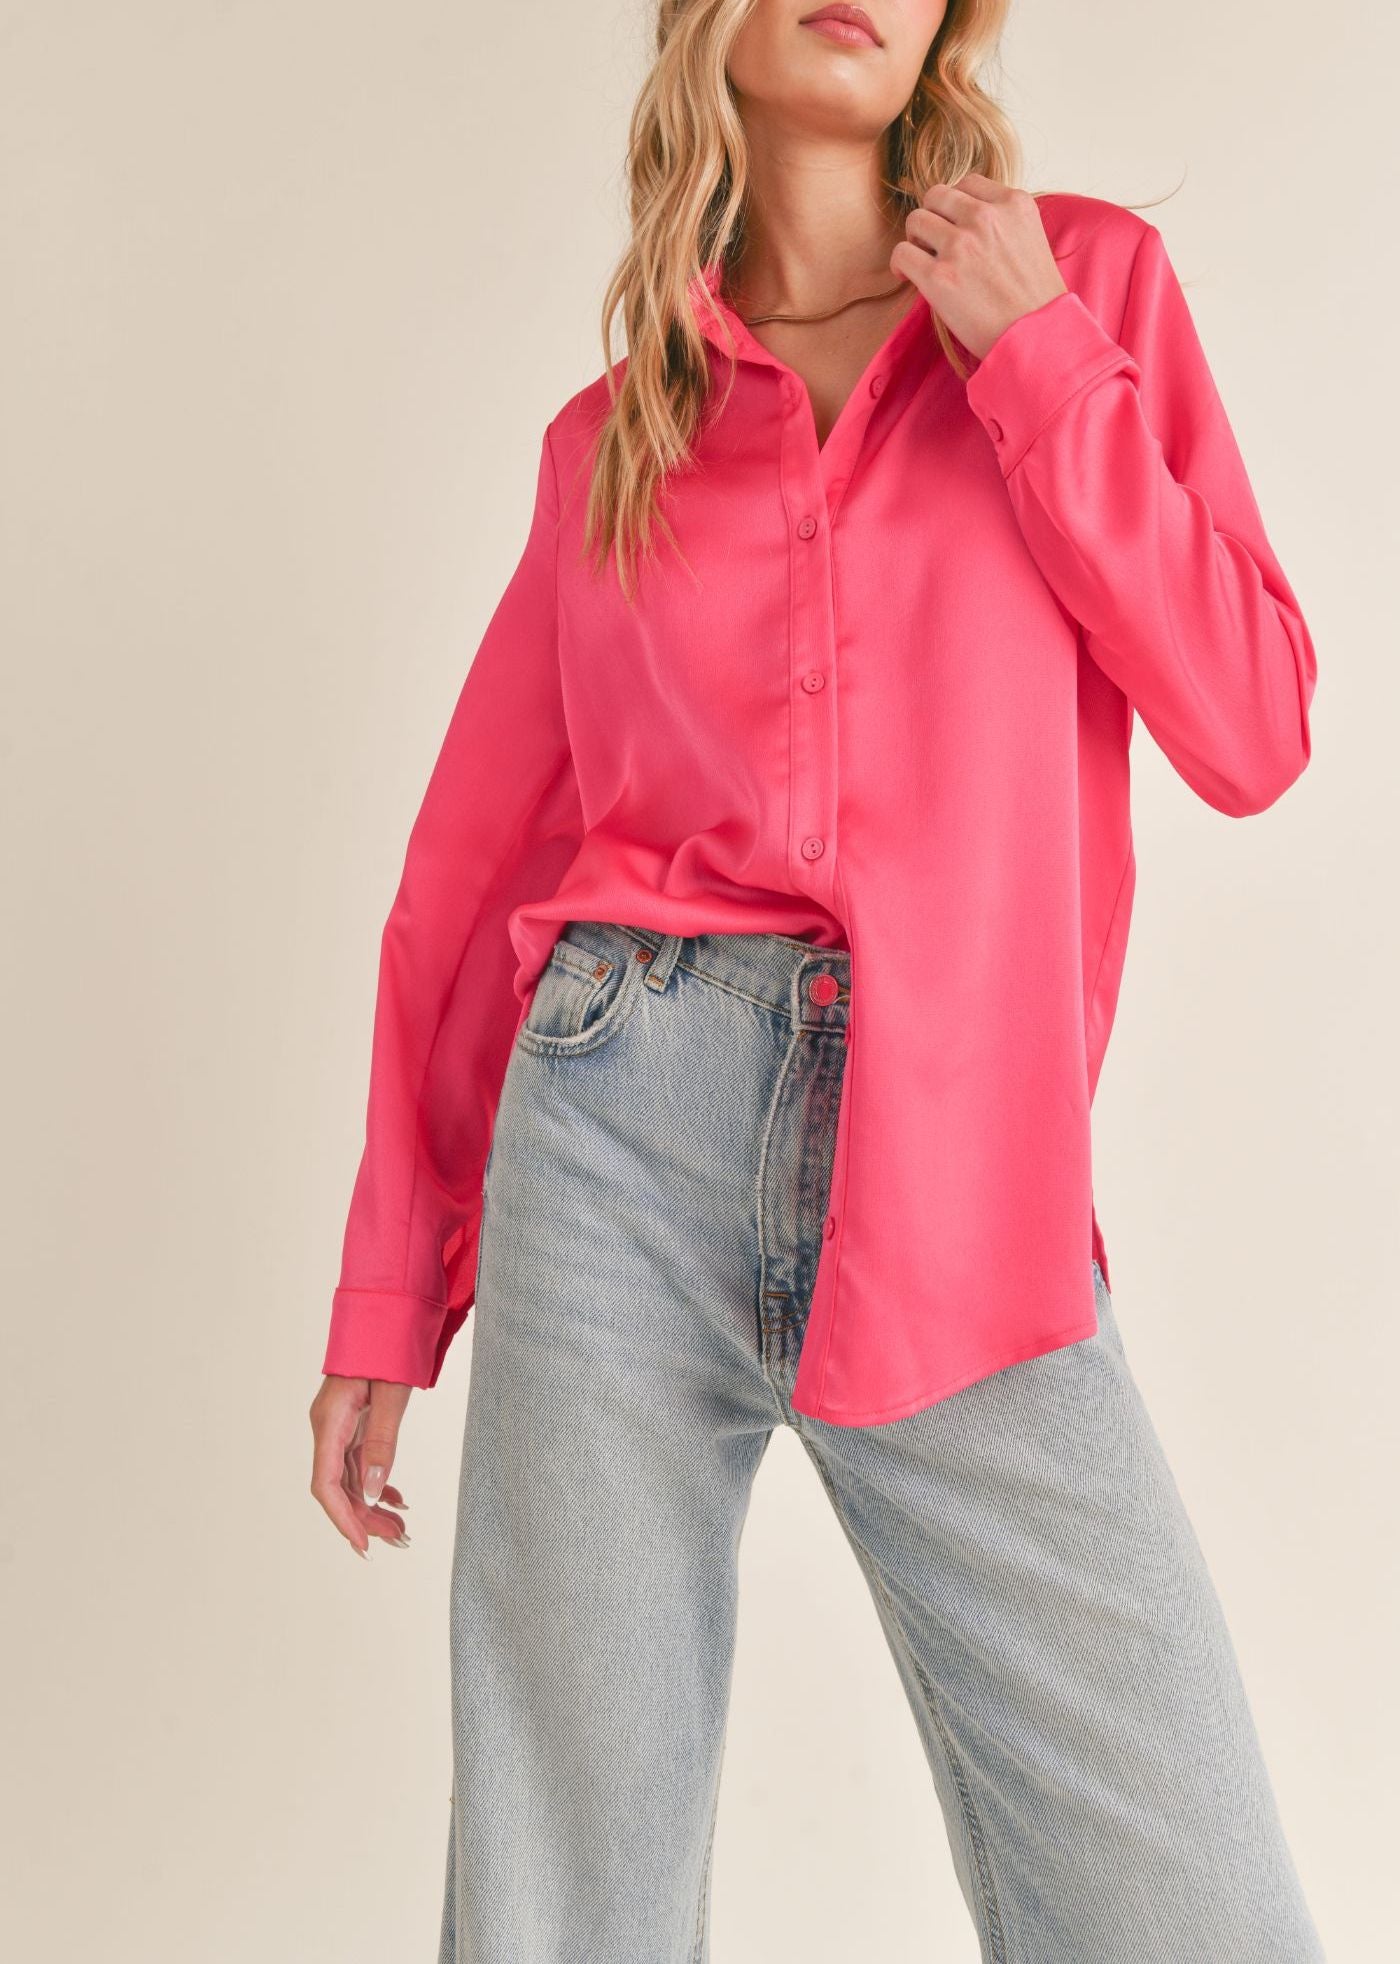 Dream of Me Hot Pink Silk Button Down Top